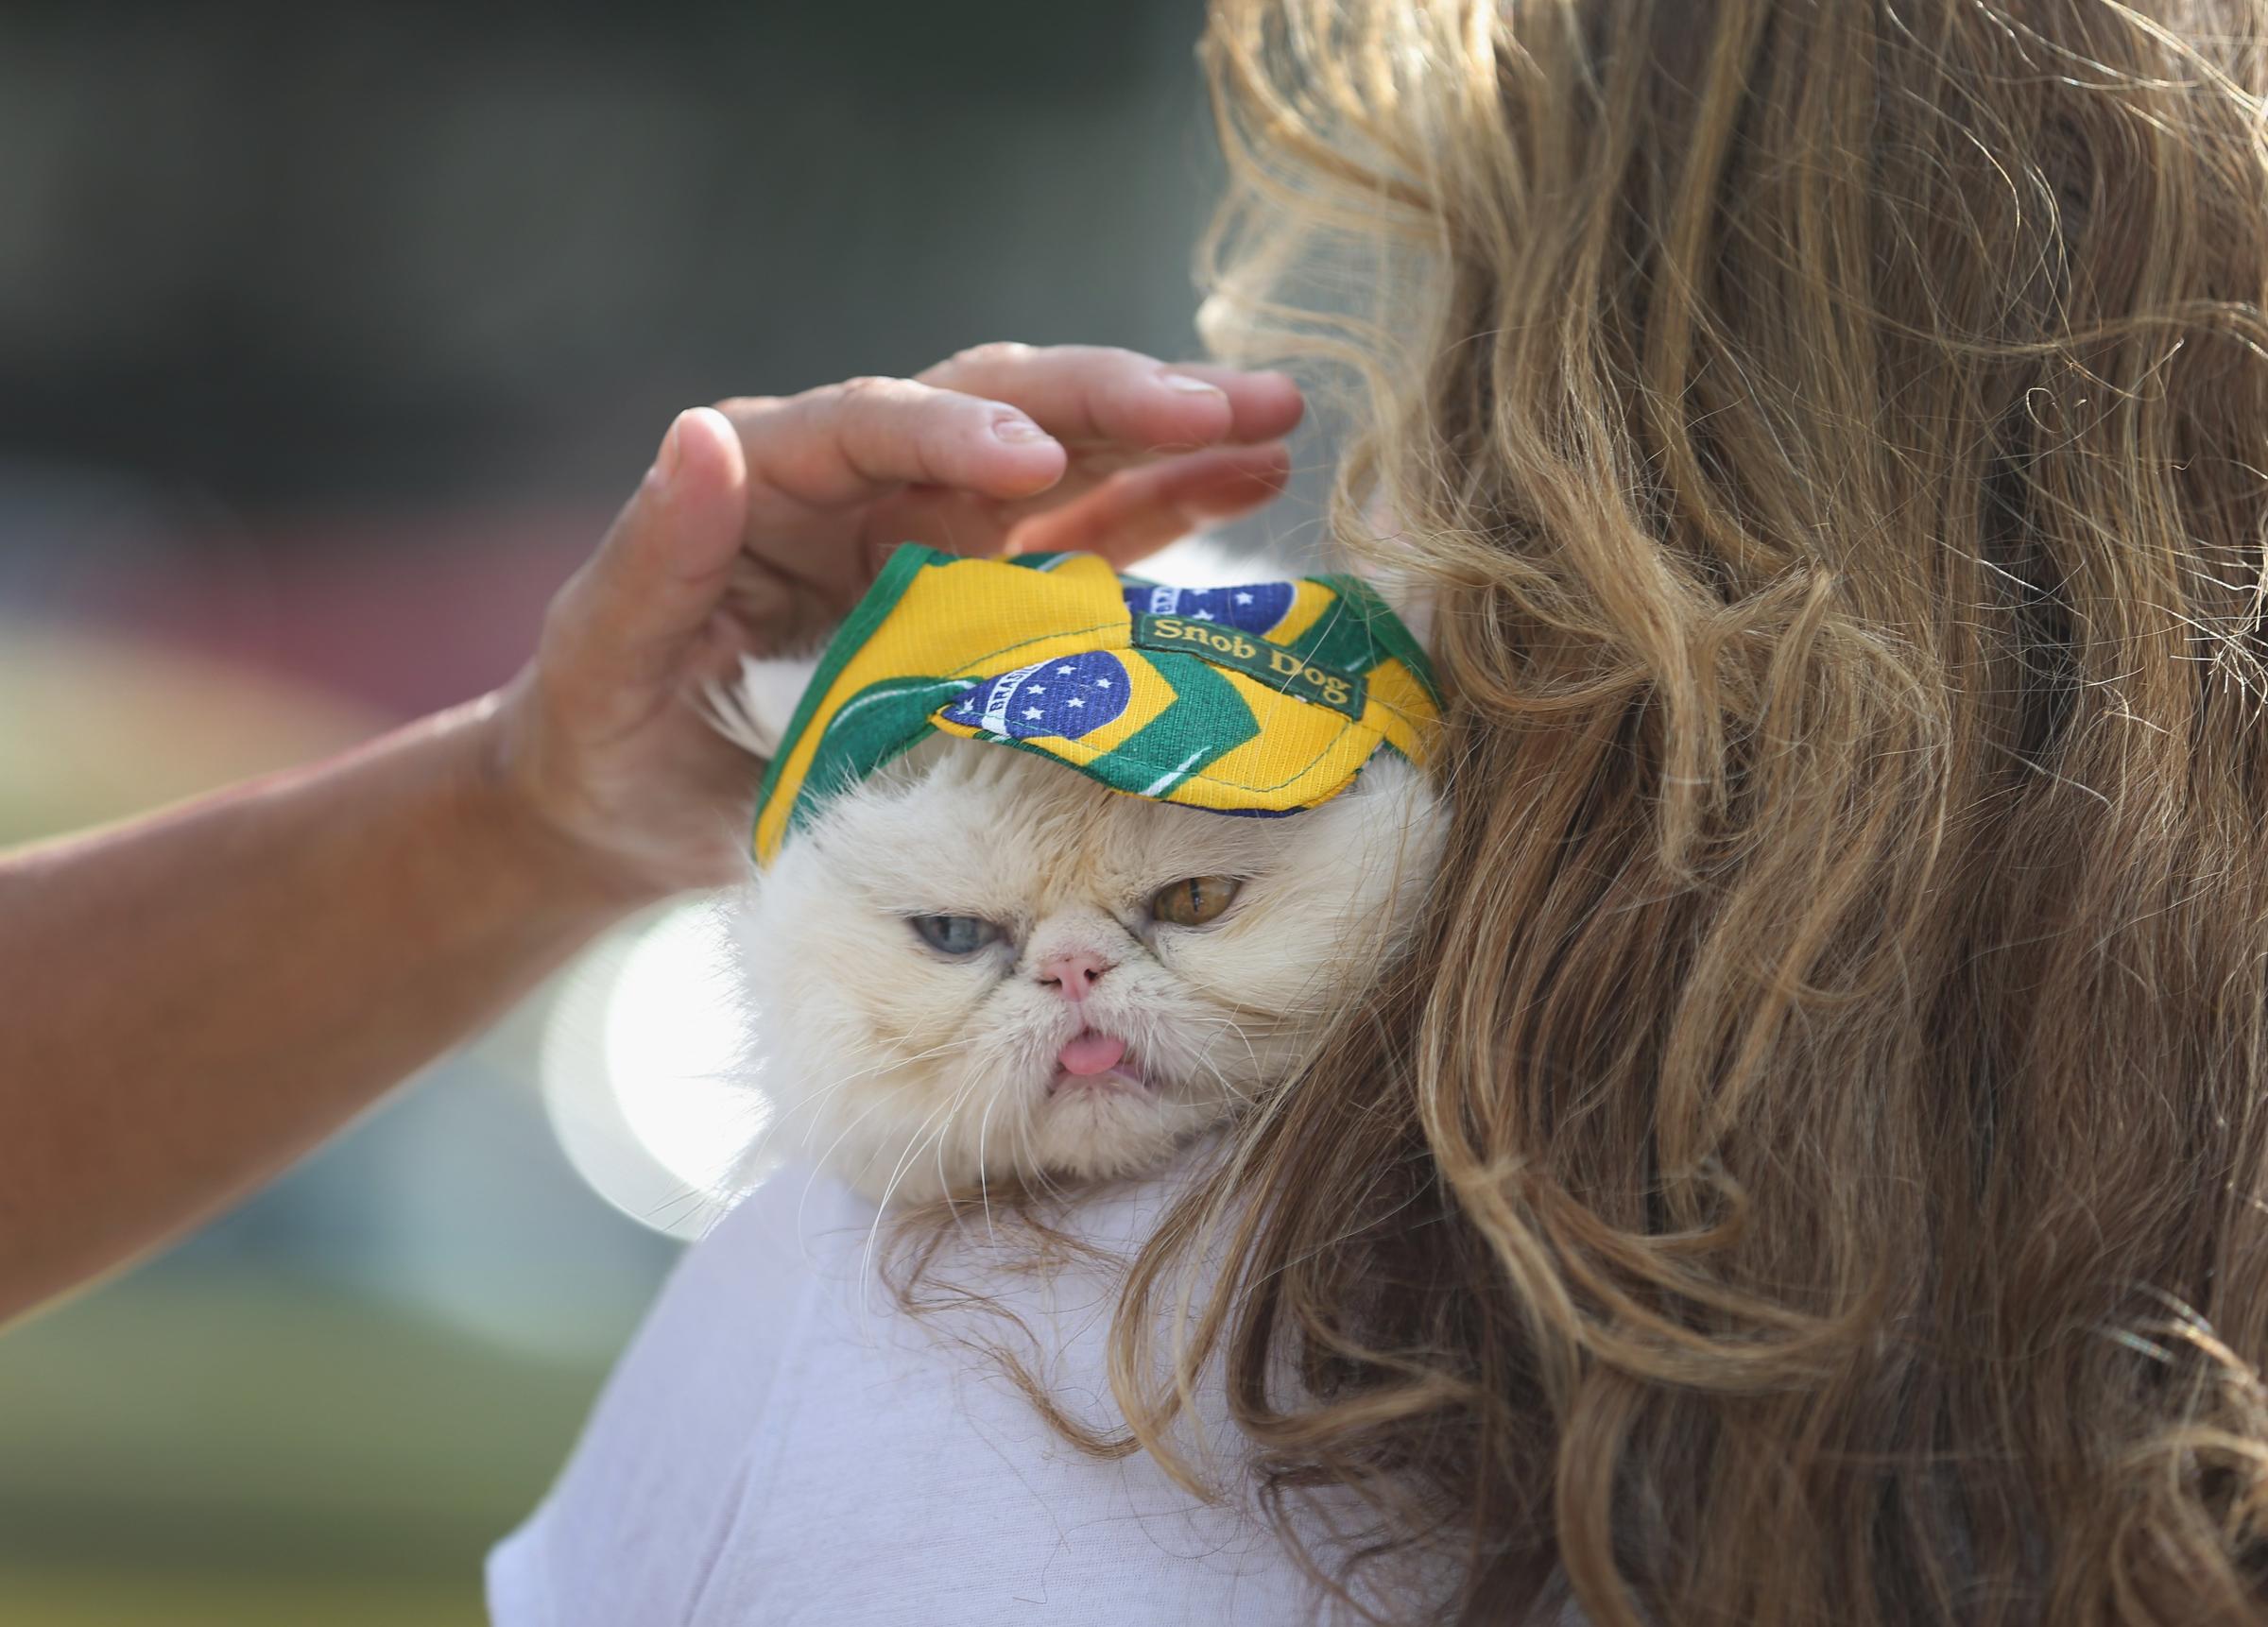 Leila de Matos holds her cat, Yandu, as it wears a Brazlian flag hat as they visit Copacabana beach while waiting for the start of the World Cup tournament on June 11, 2014 in Rio de Janeiro.